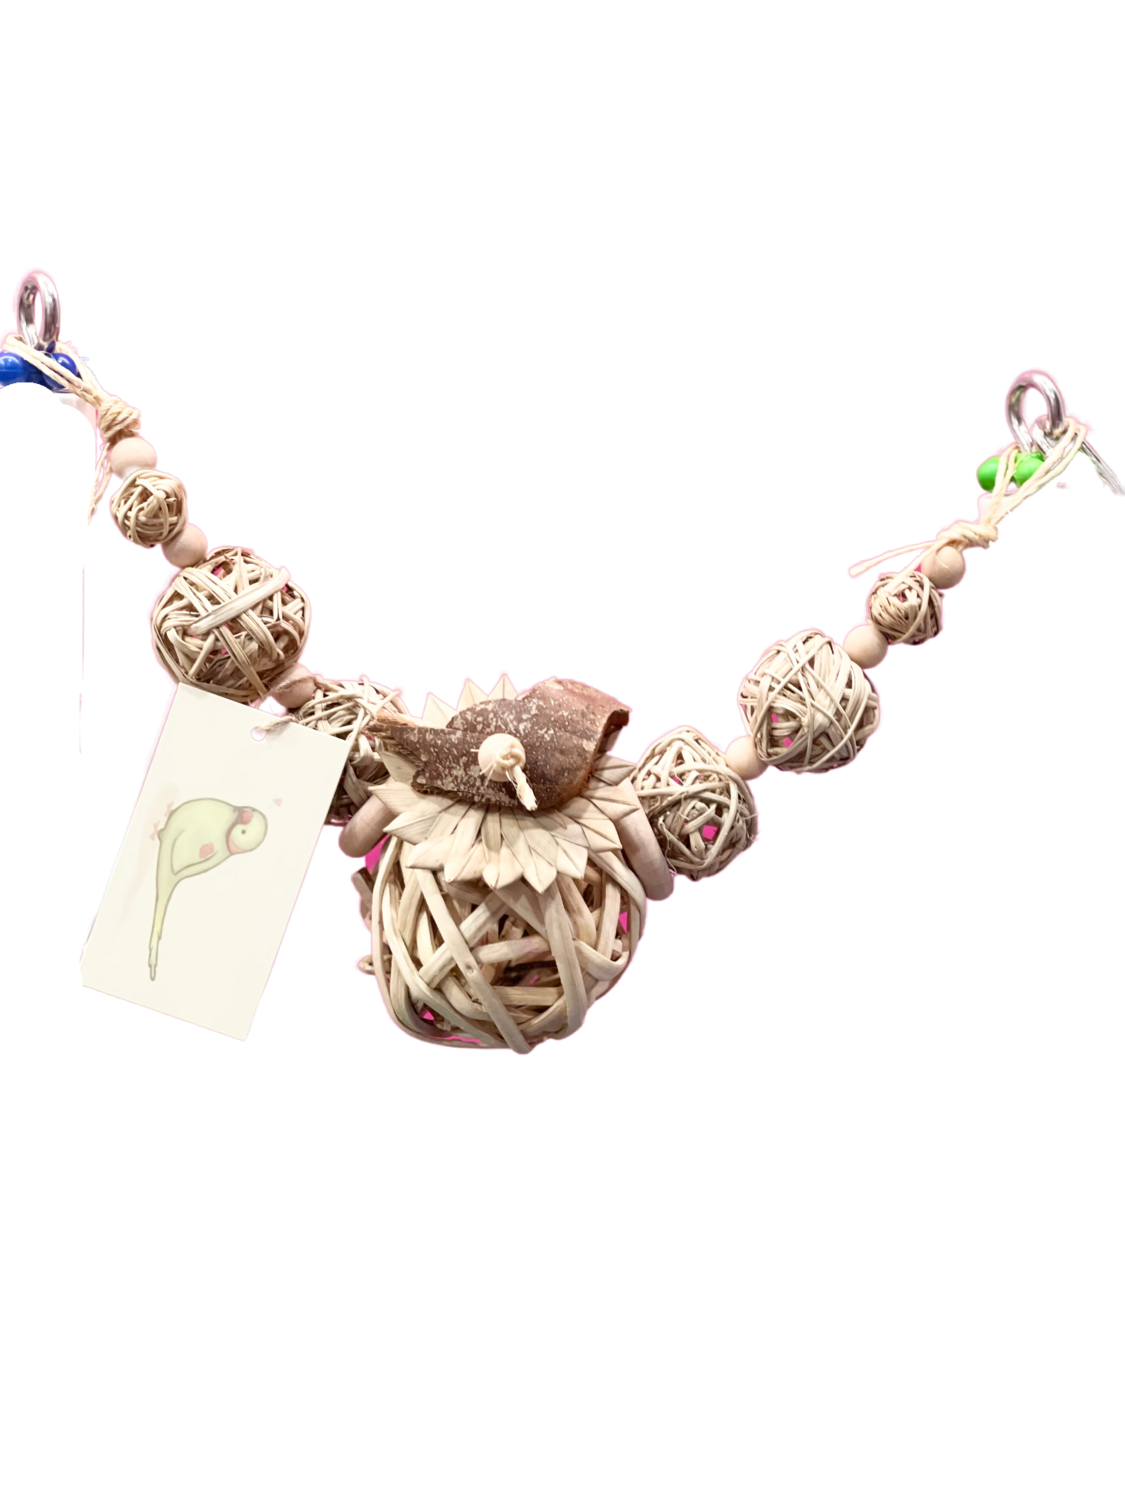 Early Bird cage garland - cage garland toy for small and medium birds, cockatiel toy, conure toy, all-natural parrot toy by Little Dinos Natural Bird Toys